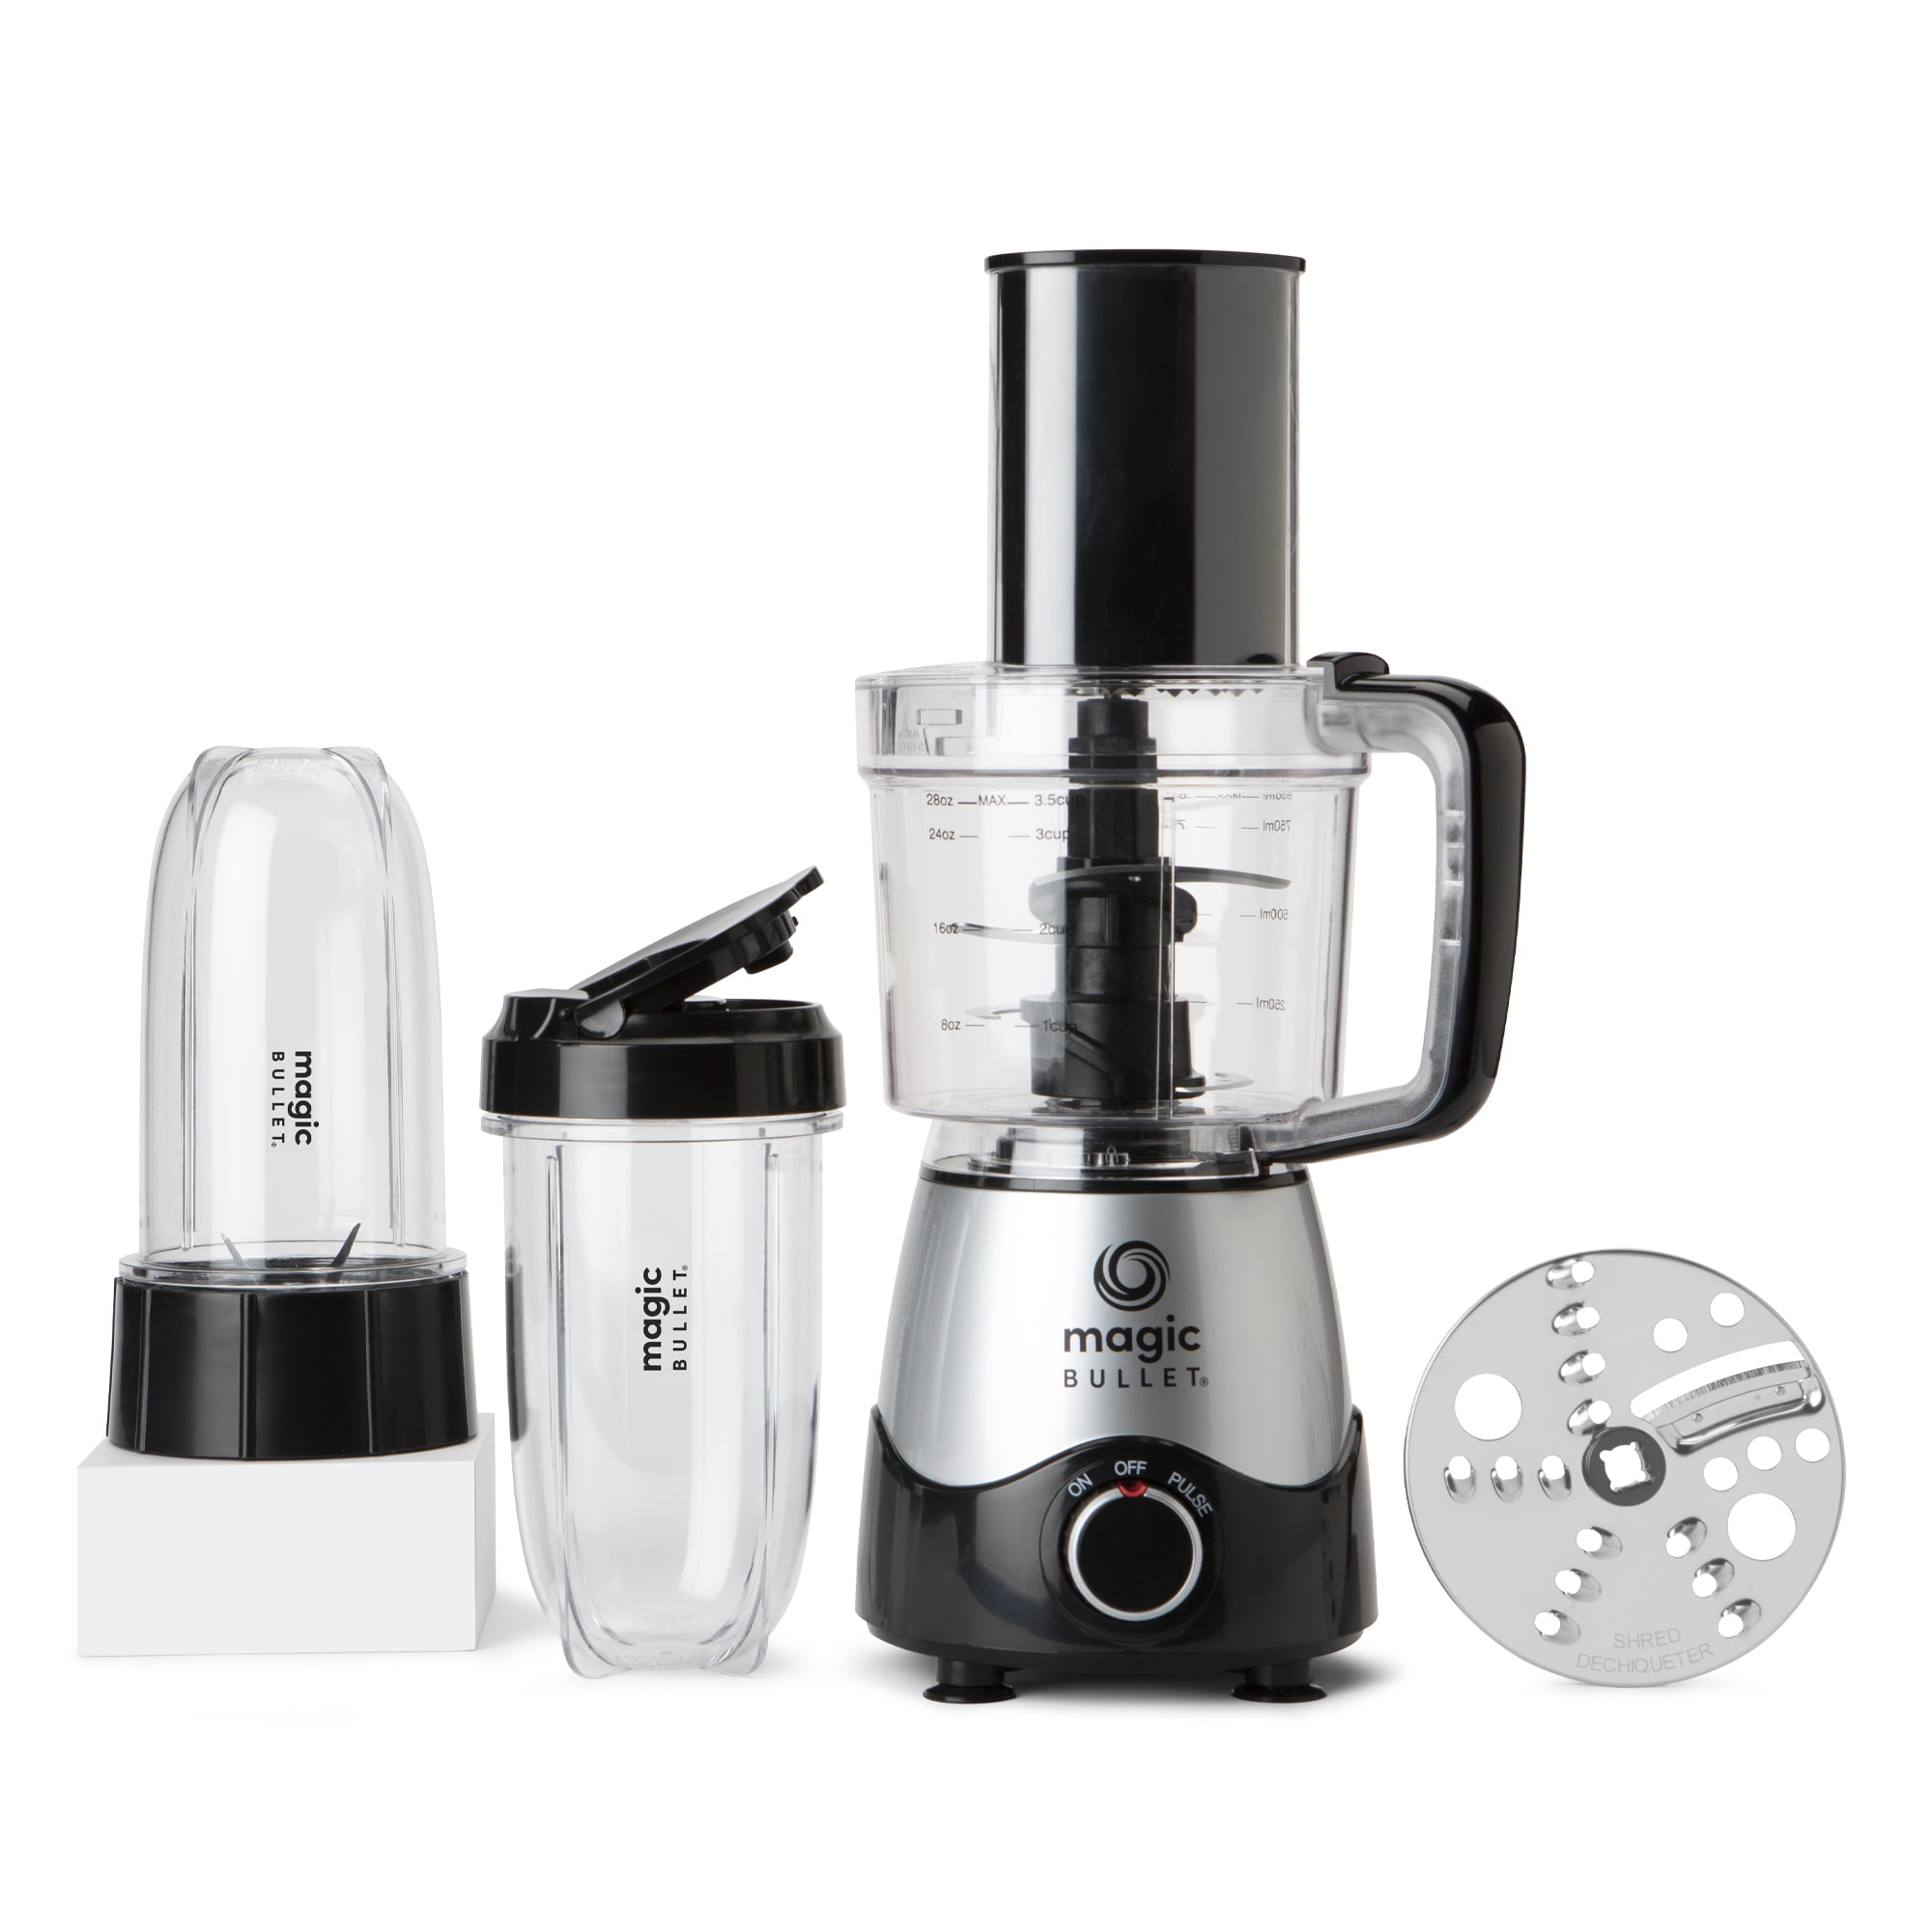 Magic Bullet Kitchen Express Personal Blender and Food Processor, Silver, MB50200